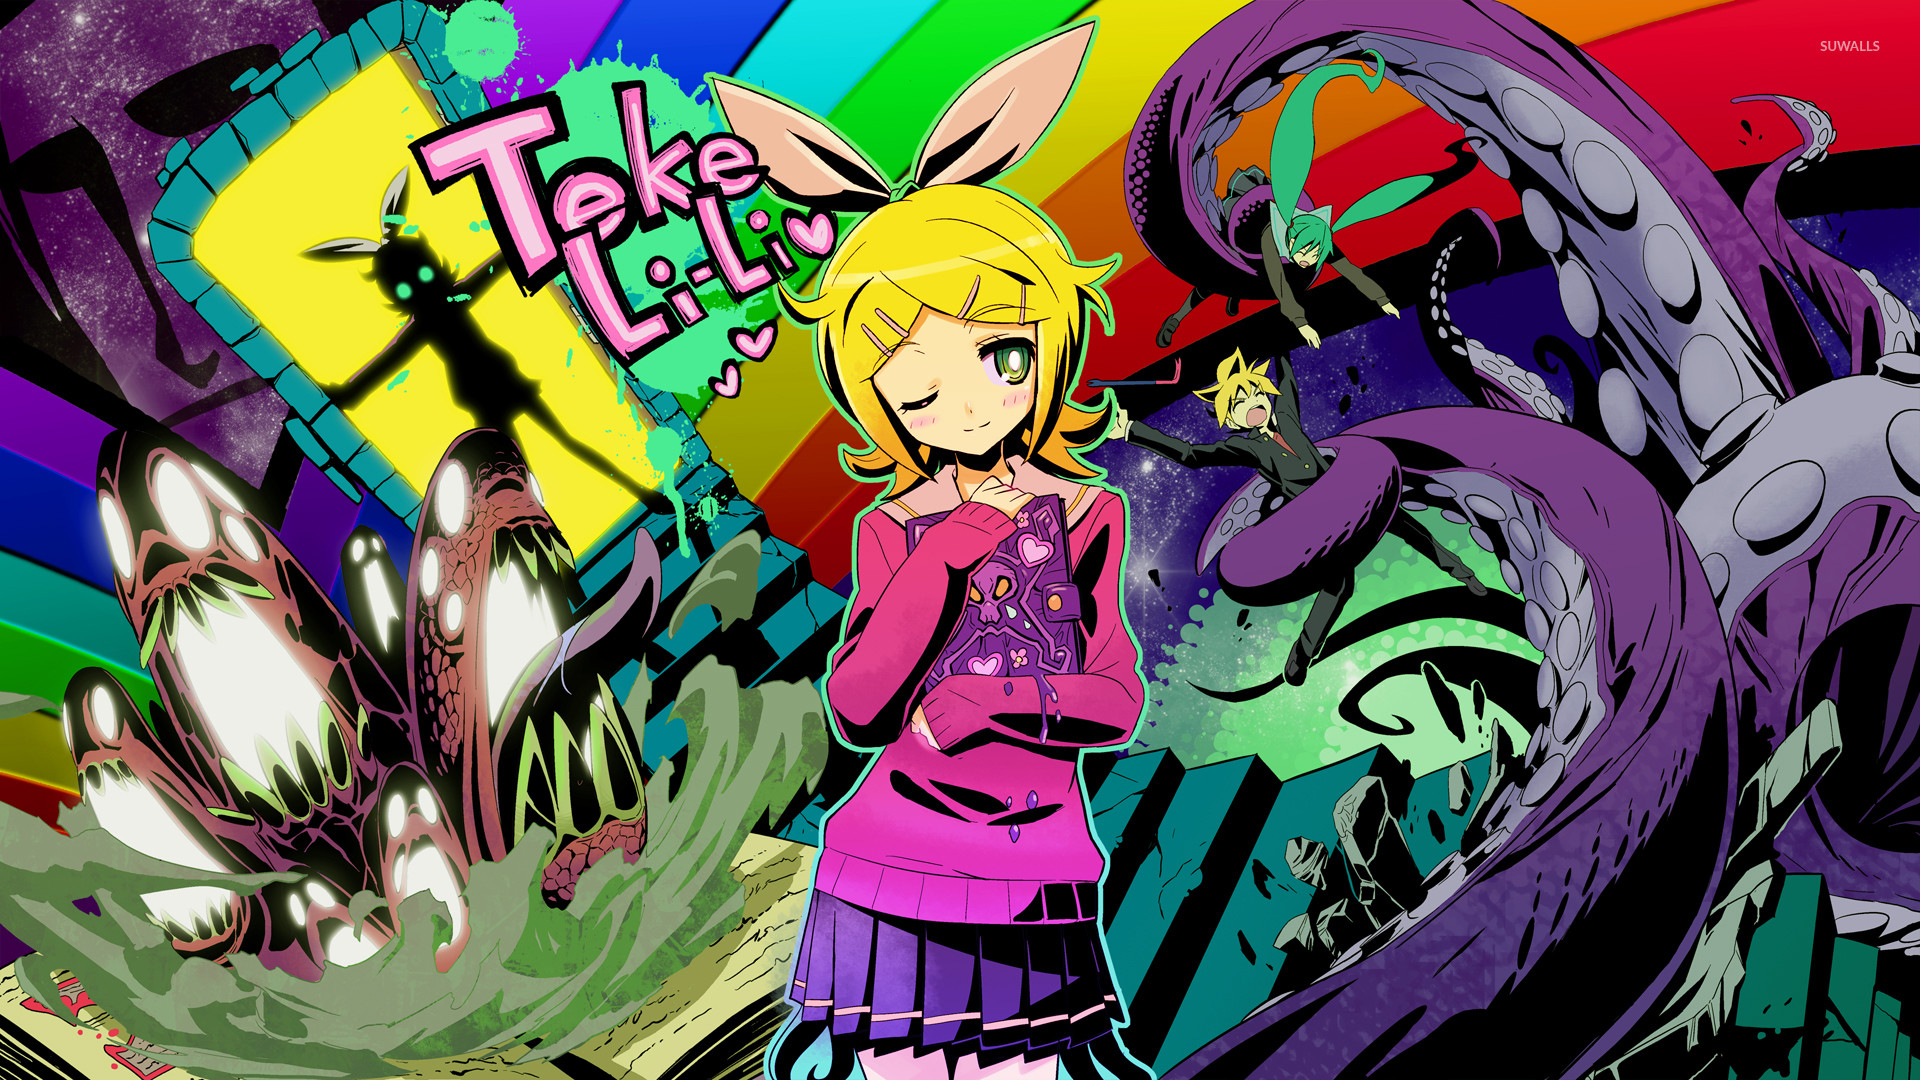 1920x1080 Kagamine Rin from Vocaloid wallpaper